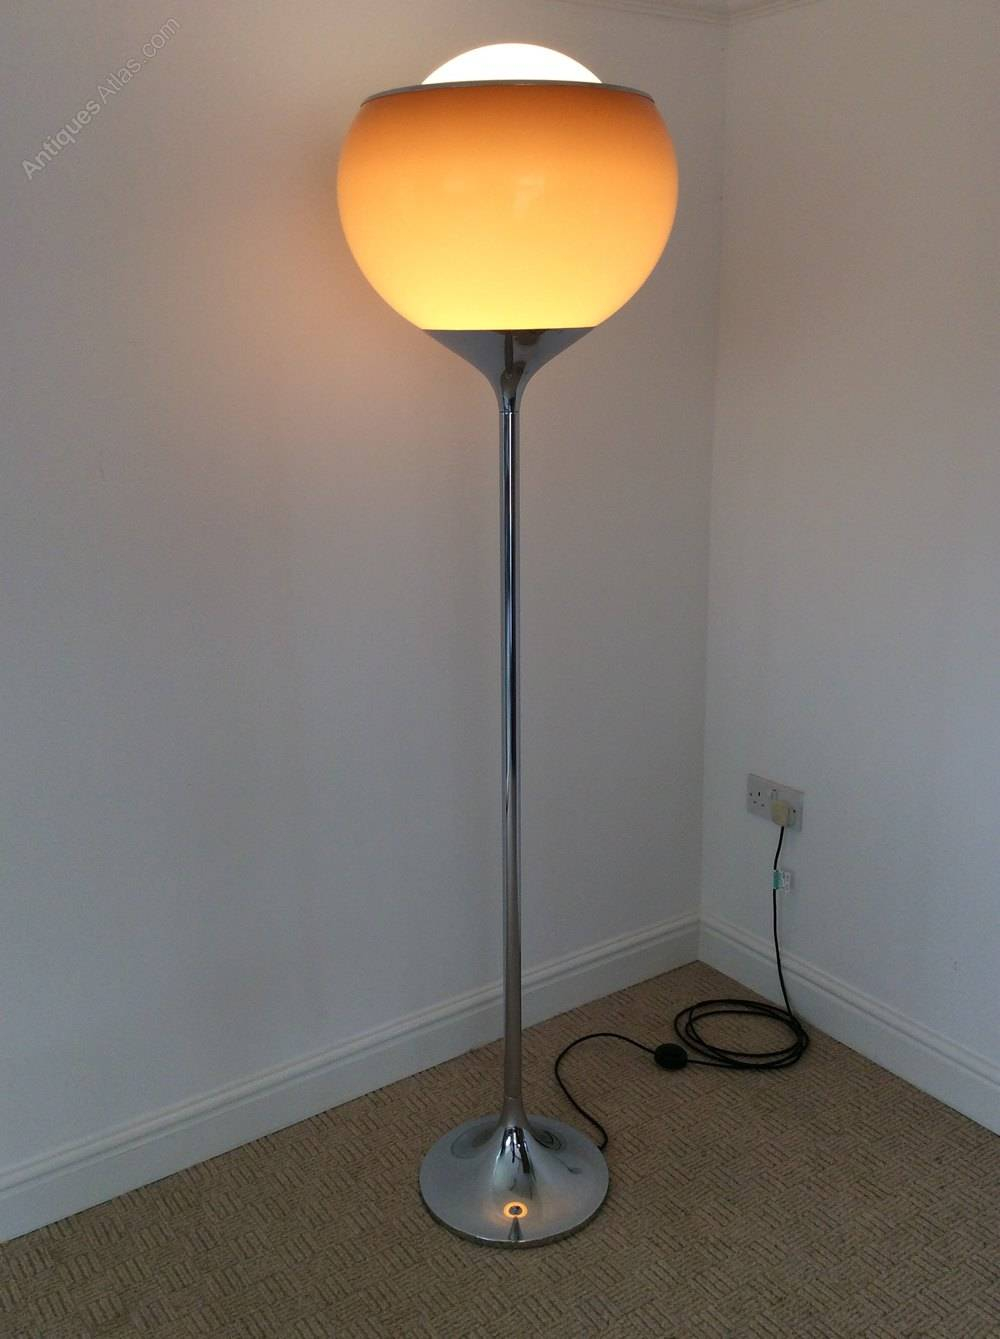 Splendid Acrylic Floor Lamps Lighting Architectures Chrome intended for size 1000 X 1339